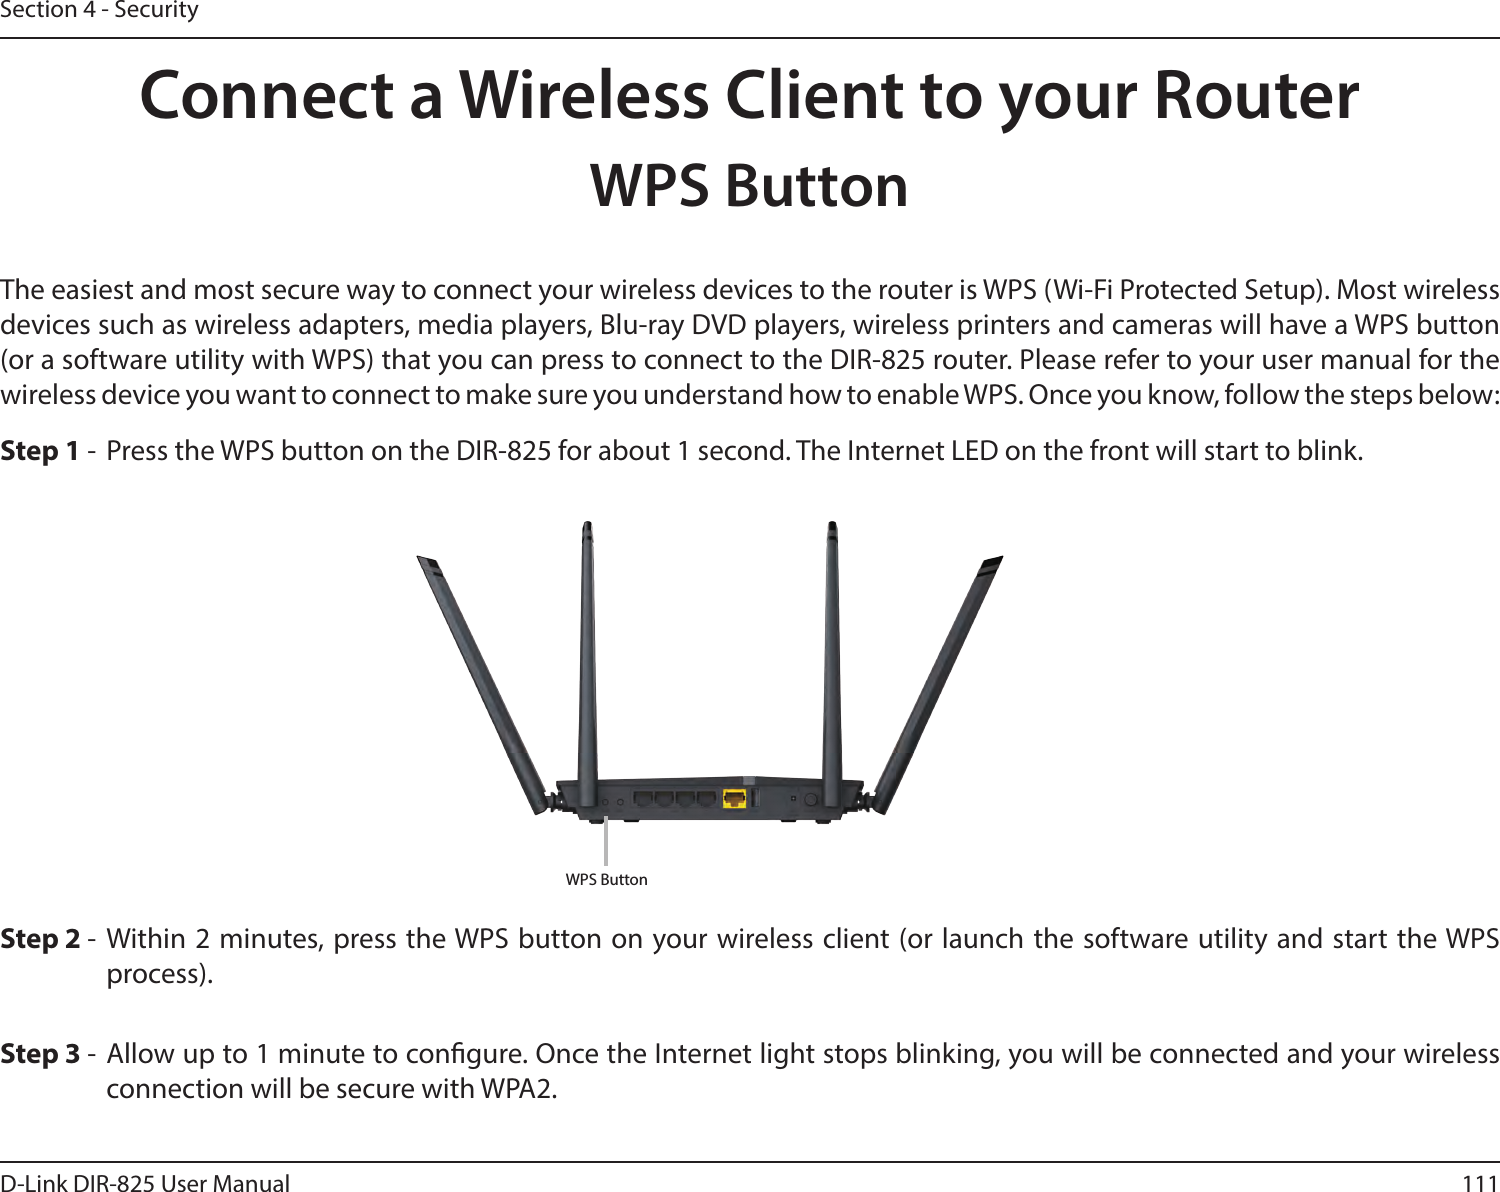 111D-Link DIR-825 User ManualSection 4 - SecurityConnect a Wireless Client to your RouterWPS ButtonStep 2 - Within 2 minutes, press the WPS button on your wireless client (or launch the software utility and start the WPS process).The easiest and most secure way to connect your wireless devices to the router is WPS (Wi-Fi Protected Setup). Most wireless devices such as wireless adapters, media players, Blu-ray DVD players, wireless printers and cameras will have a WPS button (or a software utility with WPS) that you can press to connect to the DIR-825 router. Please refer to your user manual for the wireless device you want to connect to make sure you understand how to enable WPS. Once you know, follow the steps below:Step 1 -  Press the WPS button on the DIR-825 for about 1 second. The Internet LED on the front will start to blink.Step 3 - Allow up to 1 minute to congure. Once the Internet light stops blinking, you will be connected and your wireless connection will be secure with WPA2.WPS Button